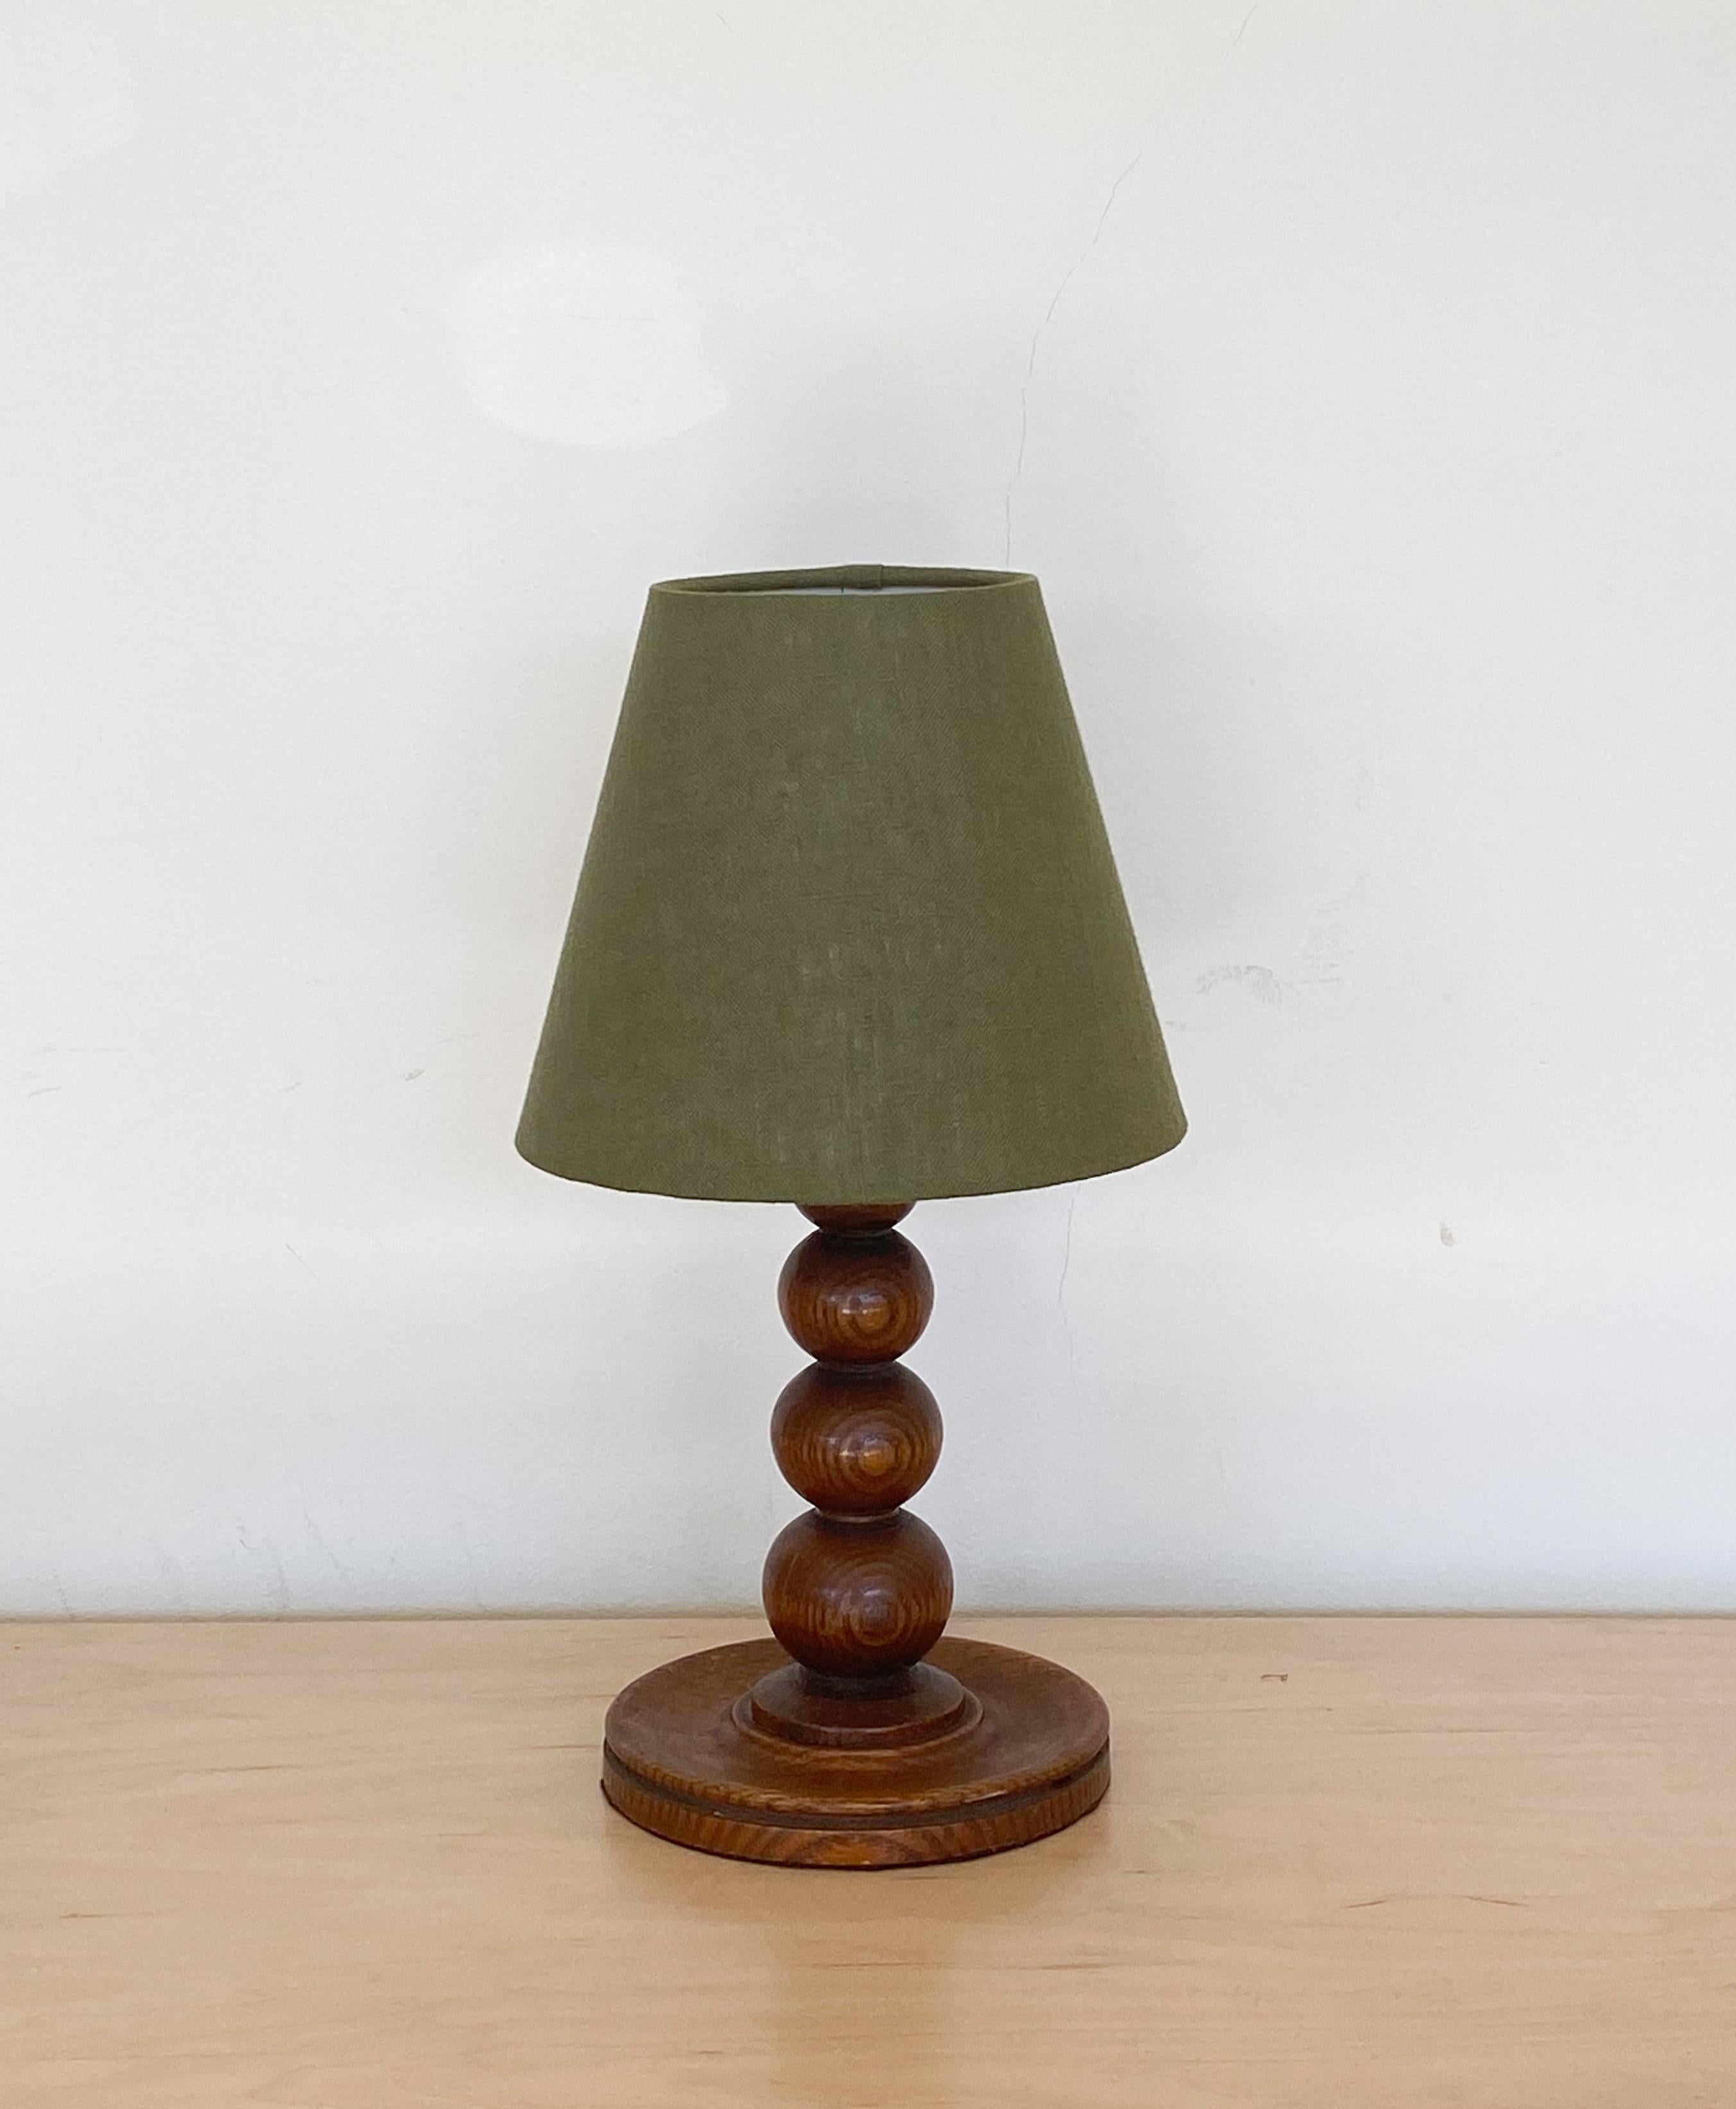 Petite wood table lamp from France, 1940s. Stacked ball forms with circular base and original wood finish. New green linen shade and newly re-wired.

Measures: Shade diameter 7